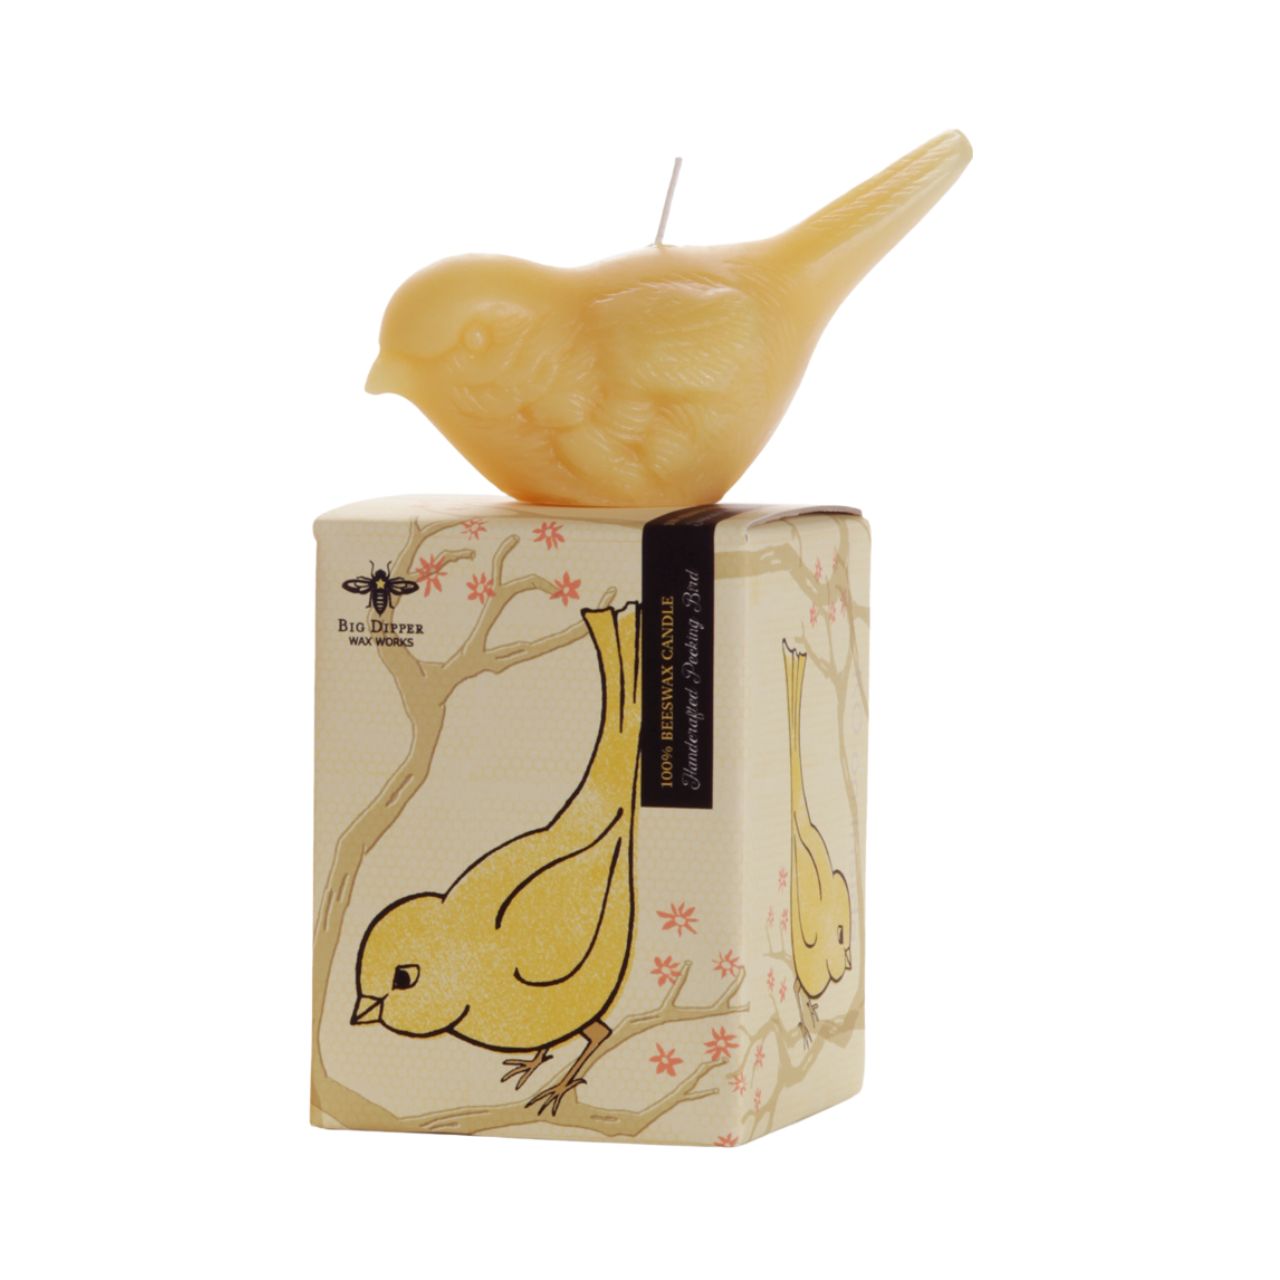 A Beeswax Songbirds Candle made by Big Dipper Wax Works, featuring a bird design.